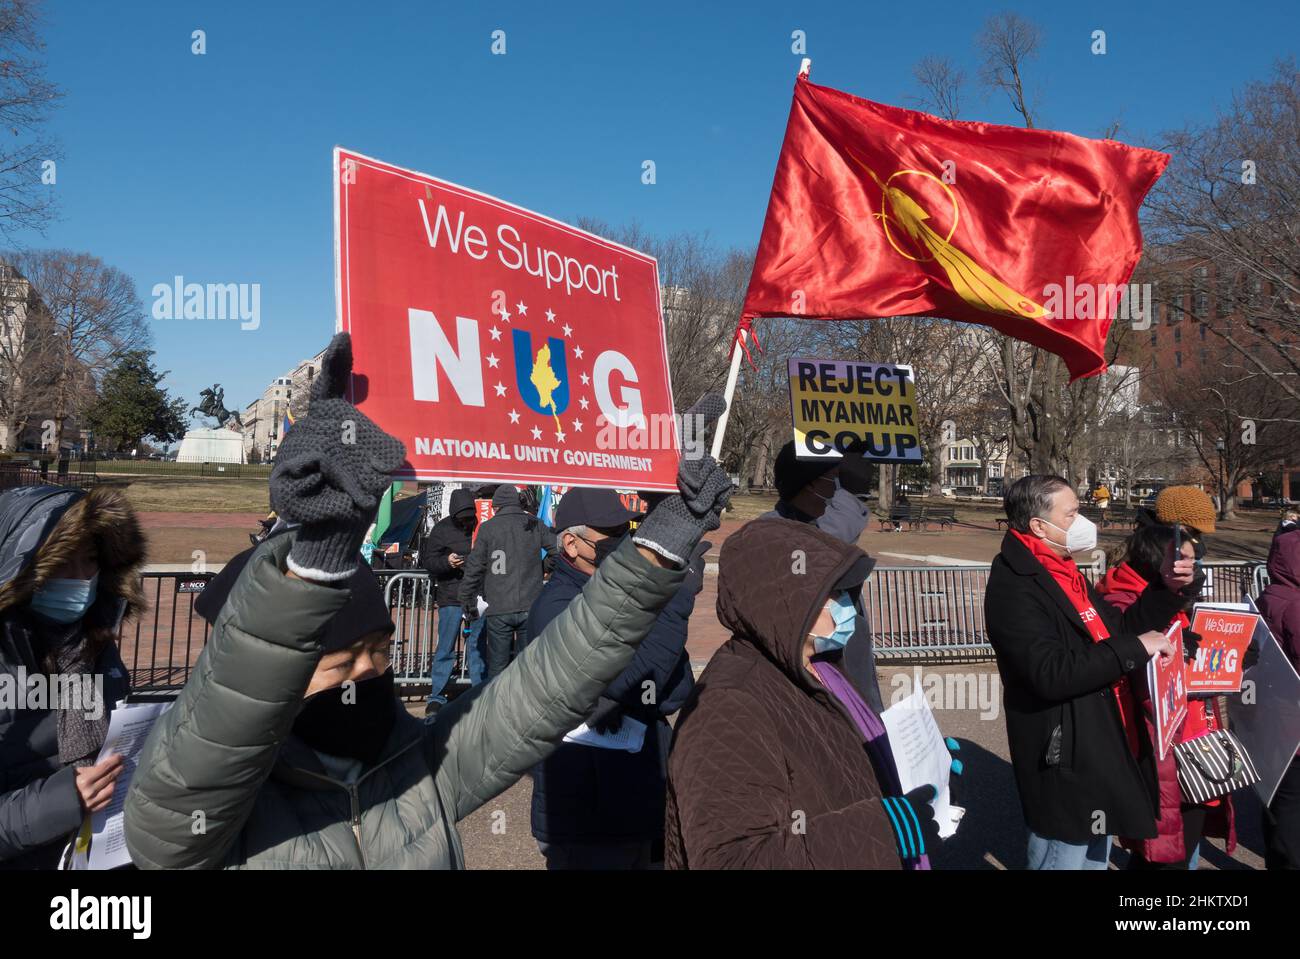 Demonstrators at the White House protesting the Myanmar military, which took power in a coup Feb.1, 2021, and has led to arrests of elected officials, killing of civilians and religious persecution. Feb. 5, 2022. Stock Photo